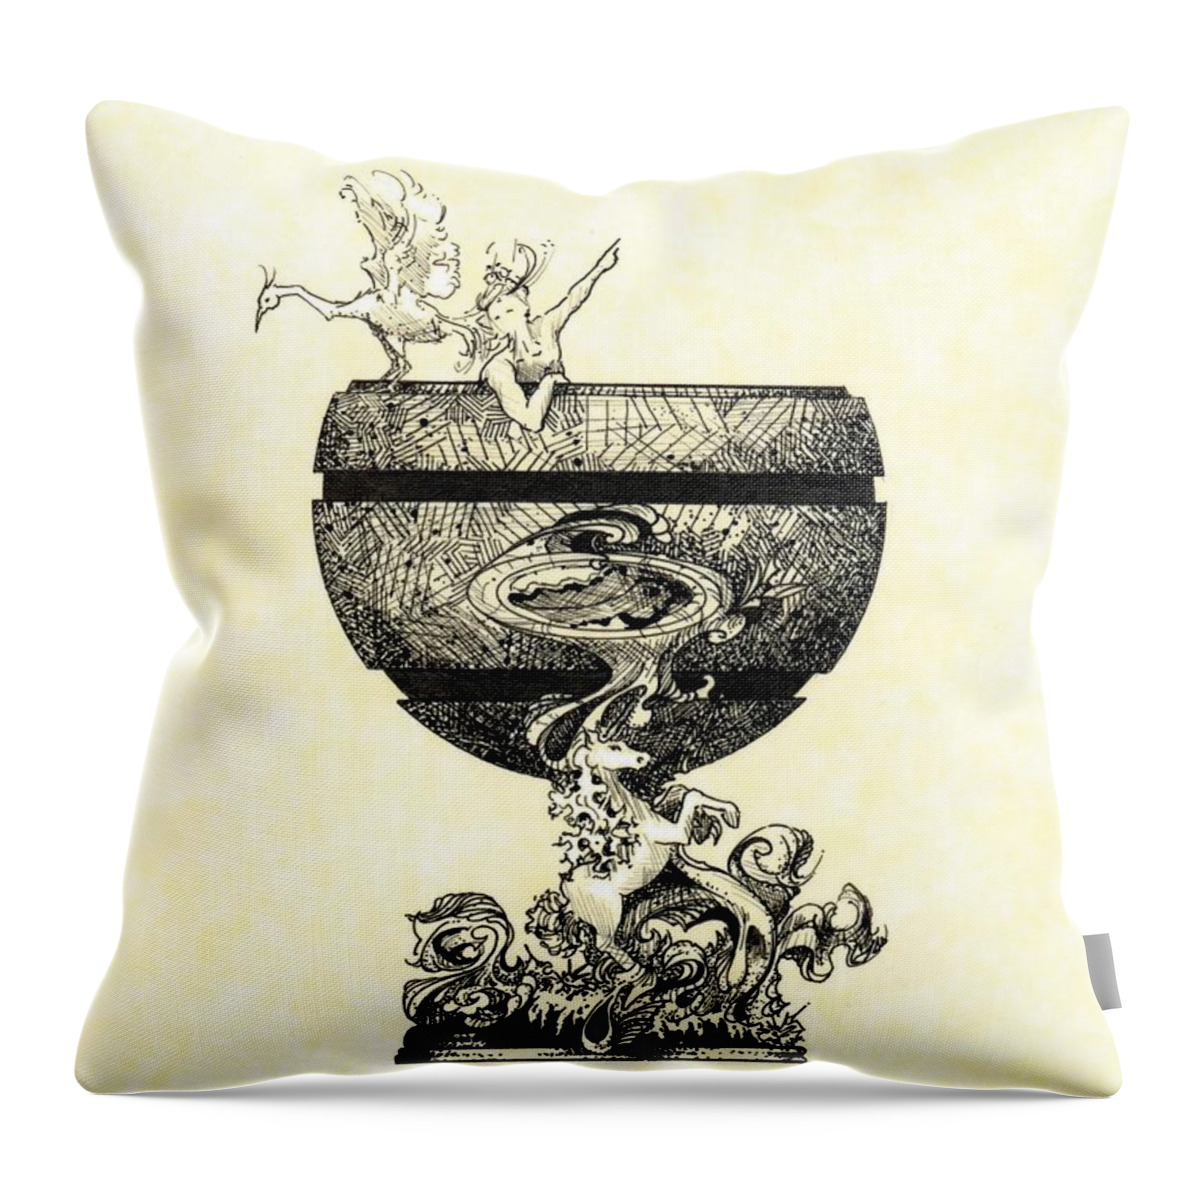 Crane Throw Pillow featuring the drawing Goblet by Julio R Lopez Jr